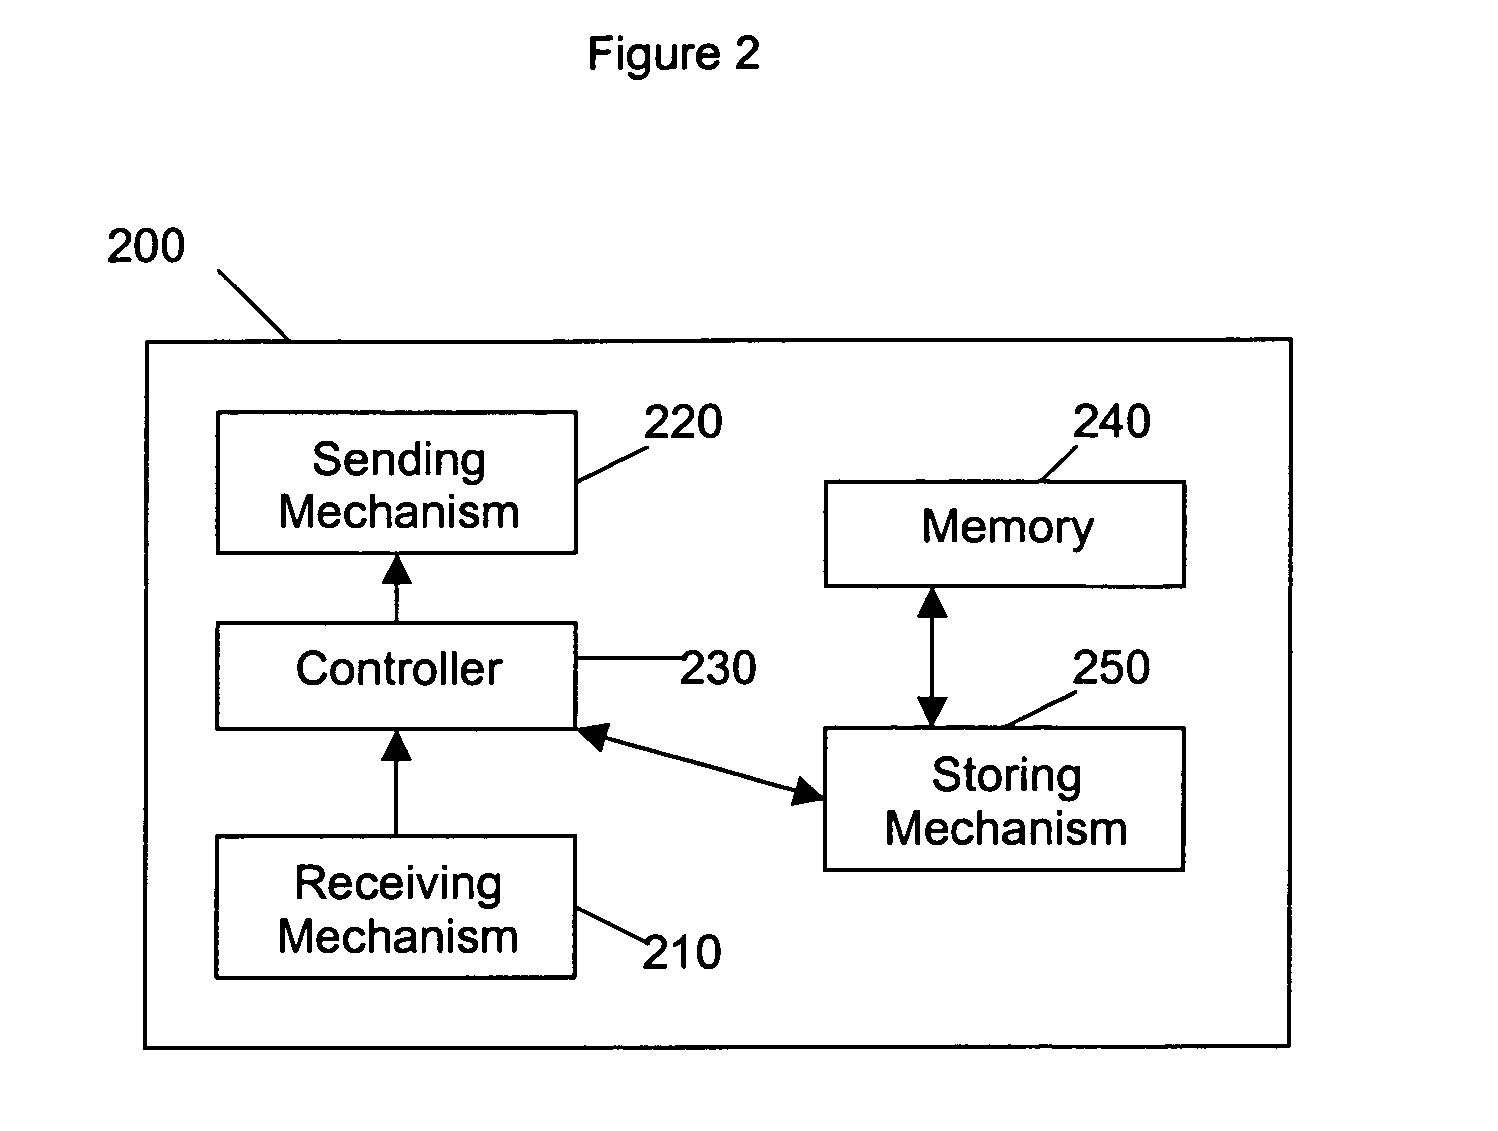 Method and apparatus for electronically exchanging and storing an image of a business card along with associated card information